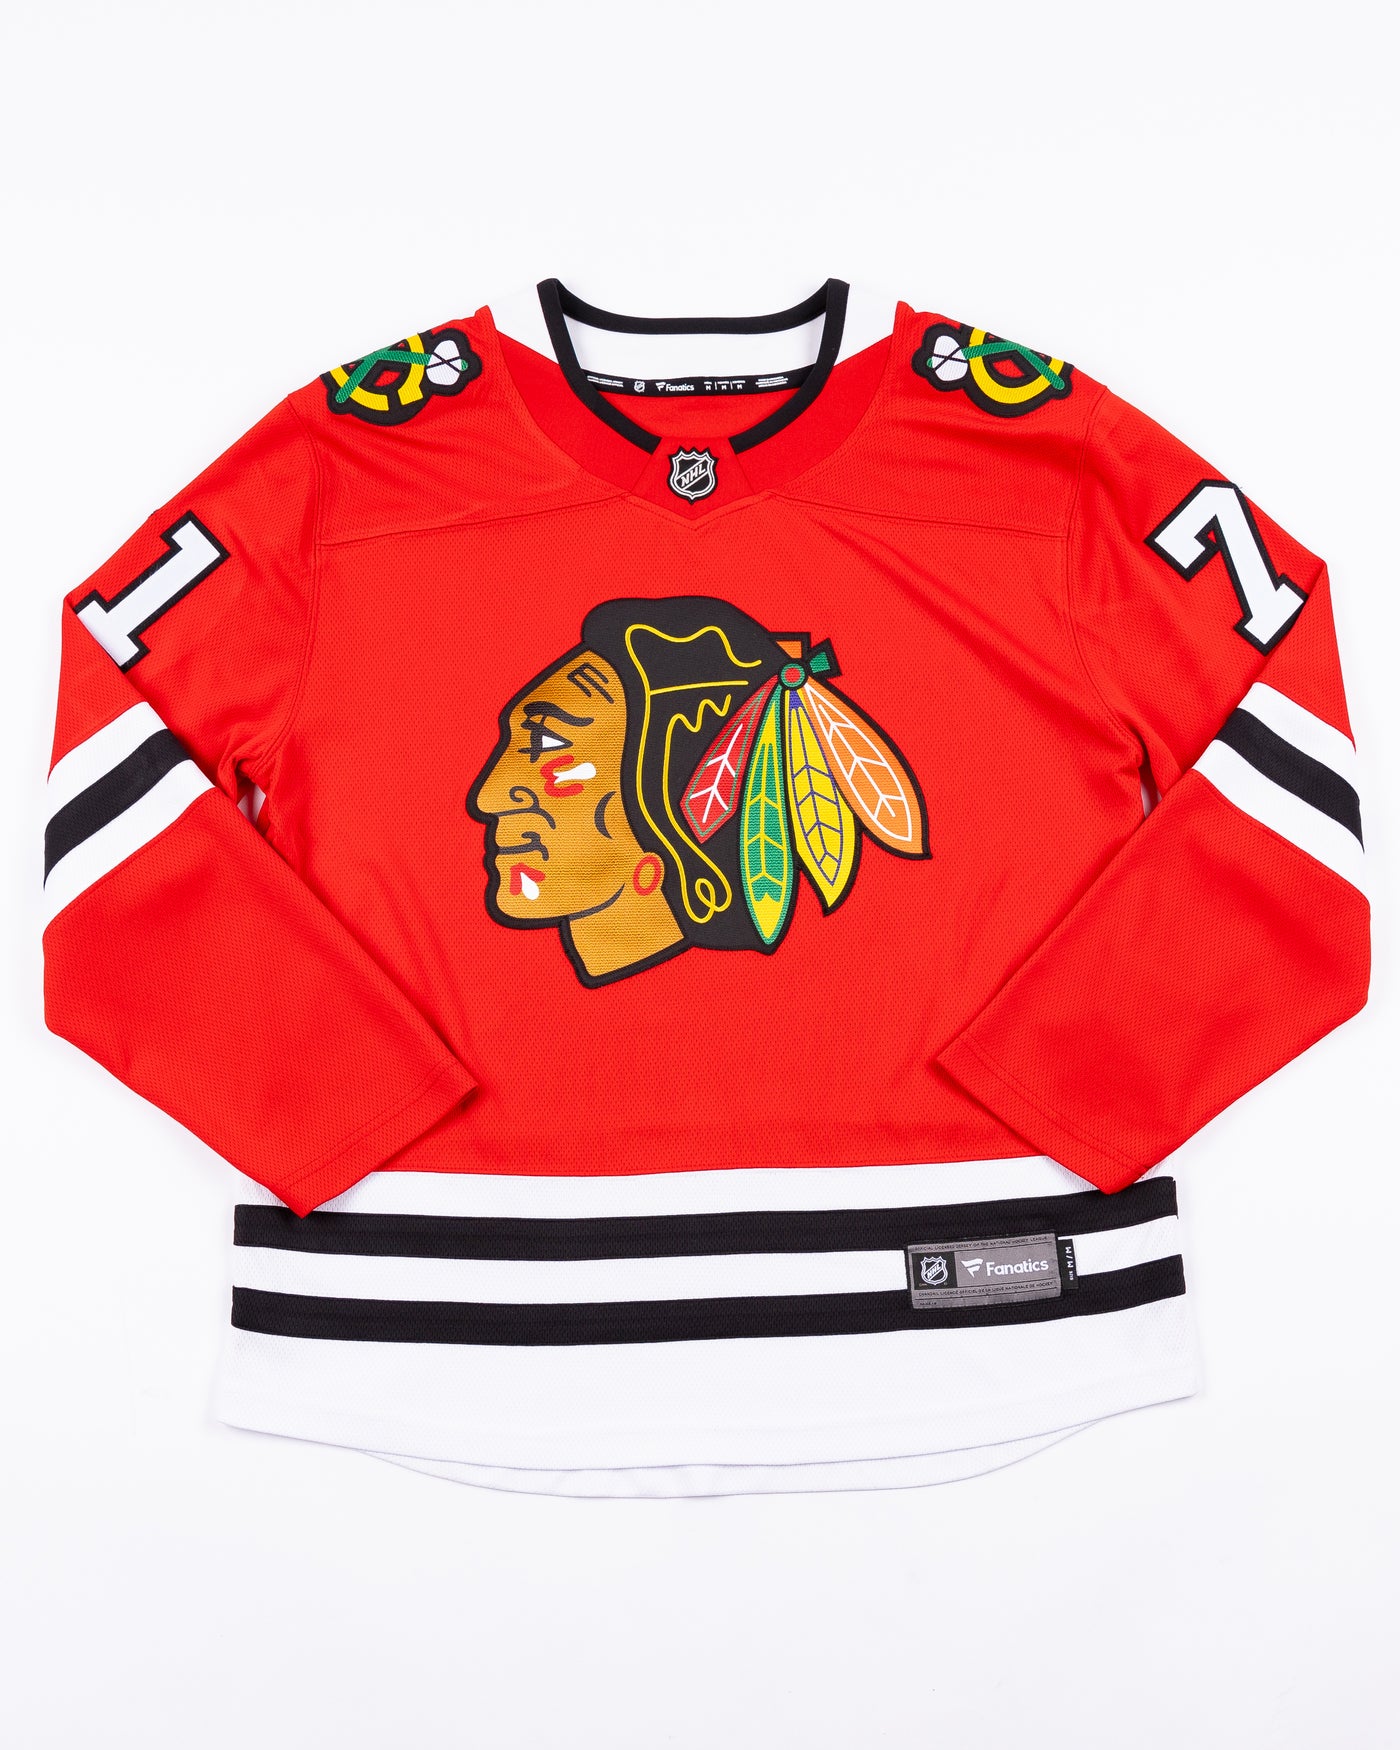 red Fanatics Chicago Blackhawks jersey with stitched Taylor Hall name and number - front lay flat